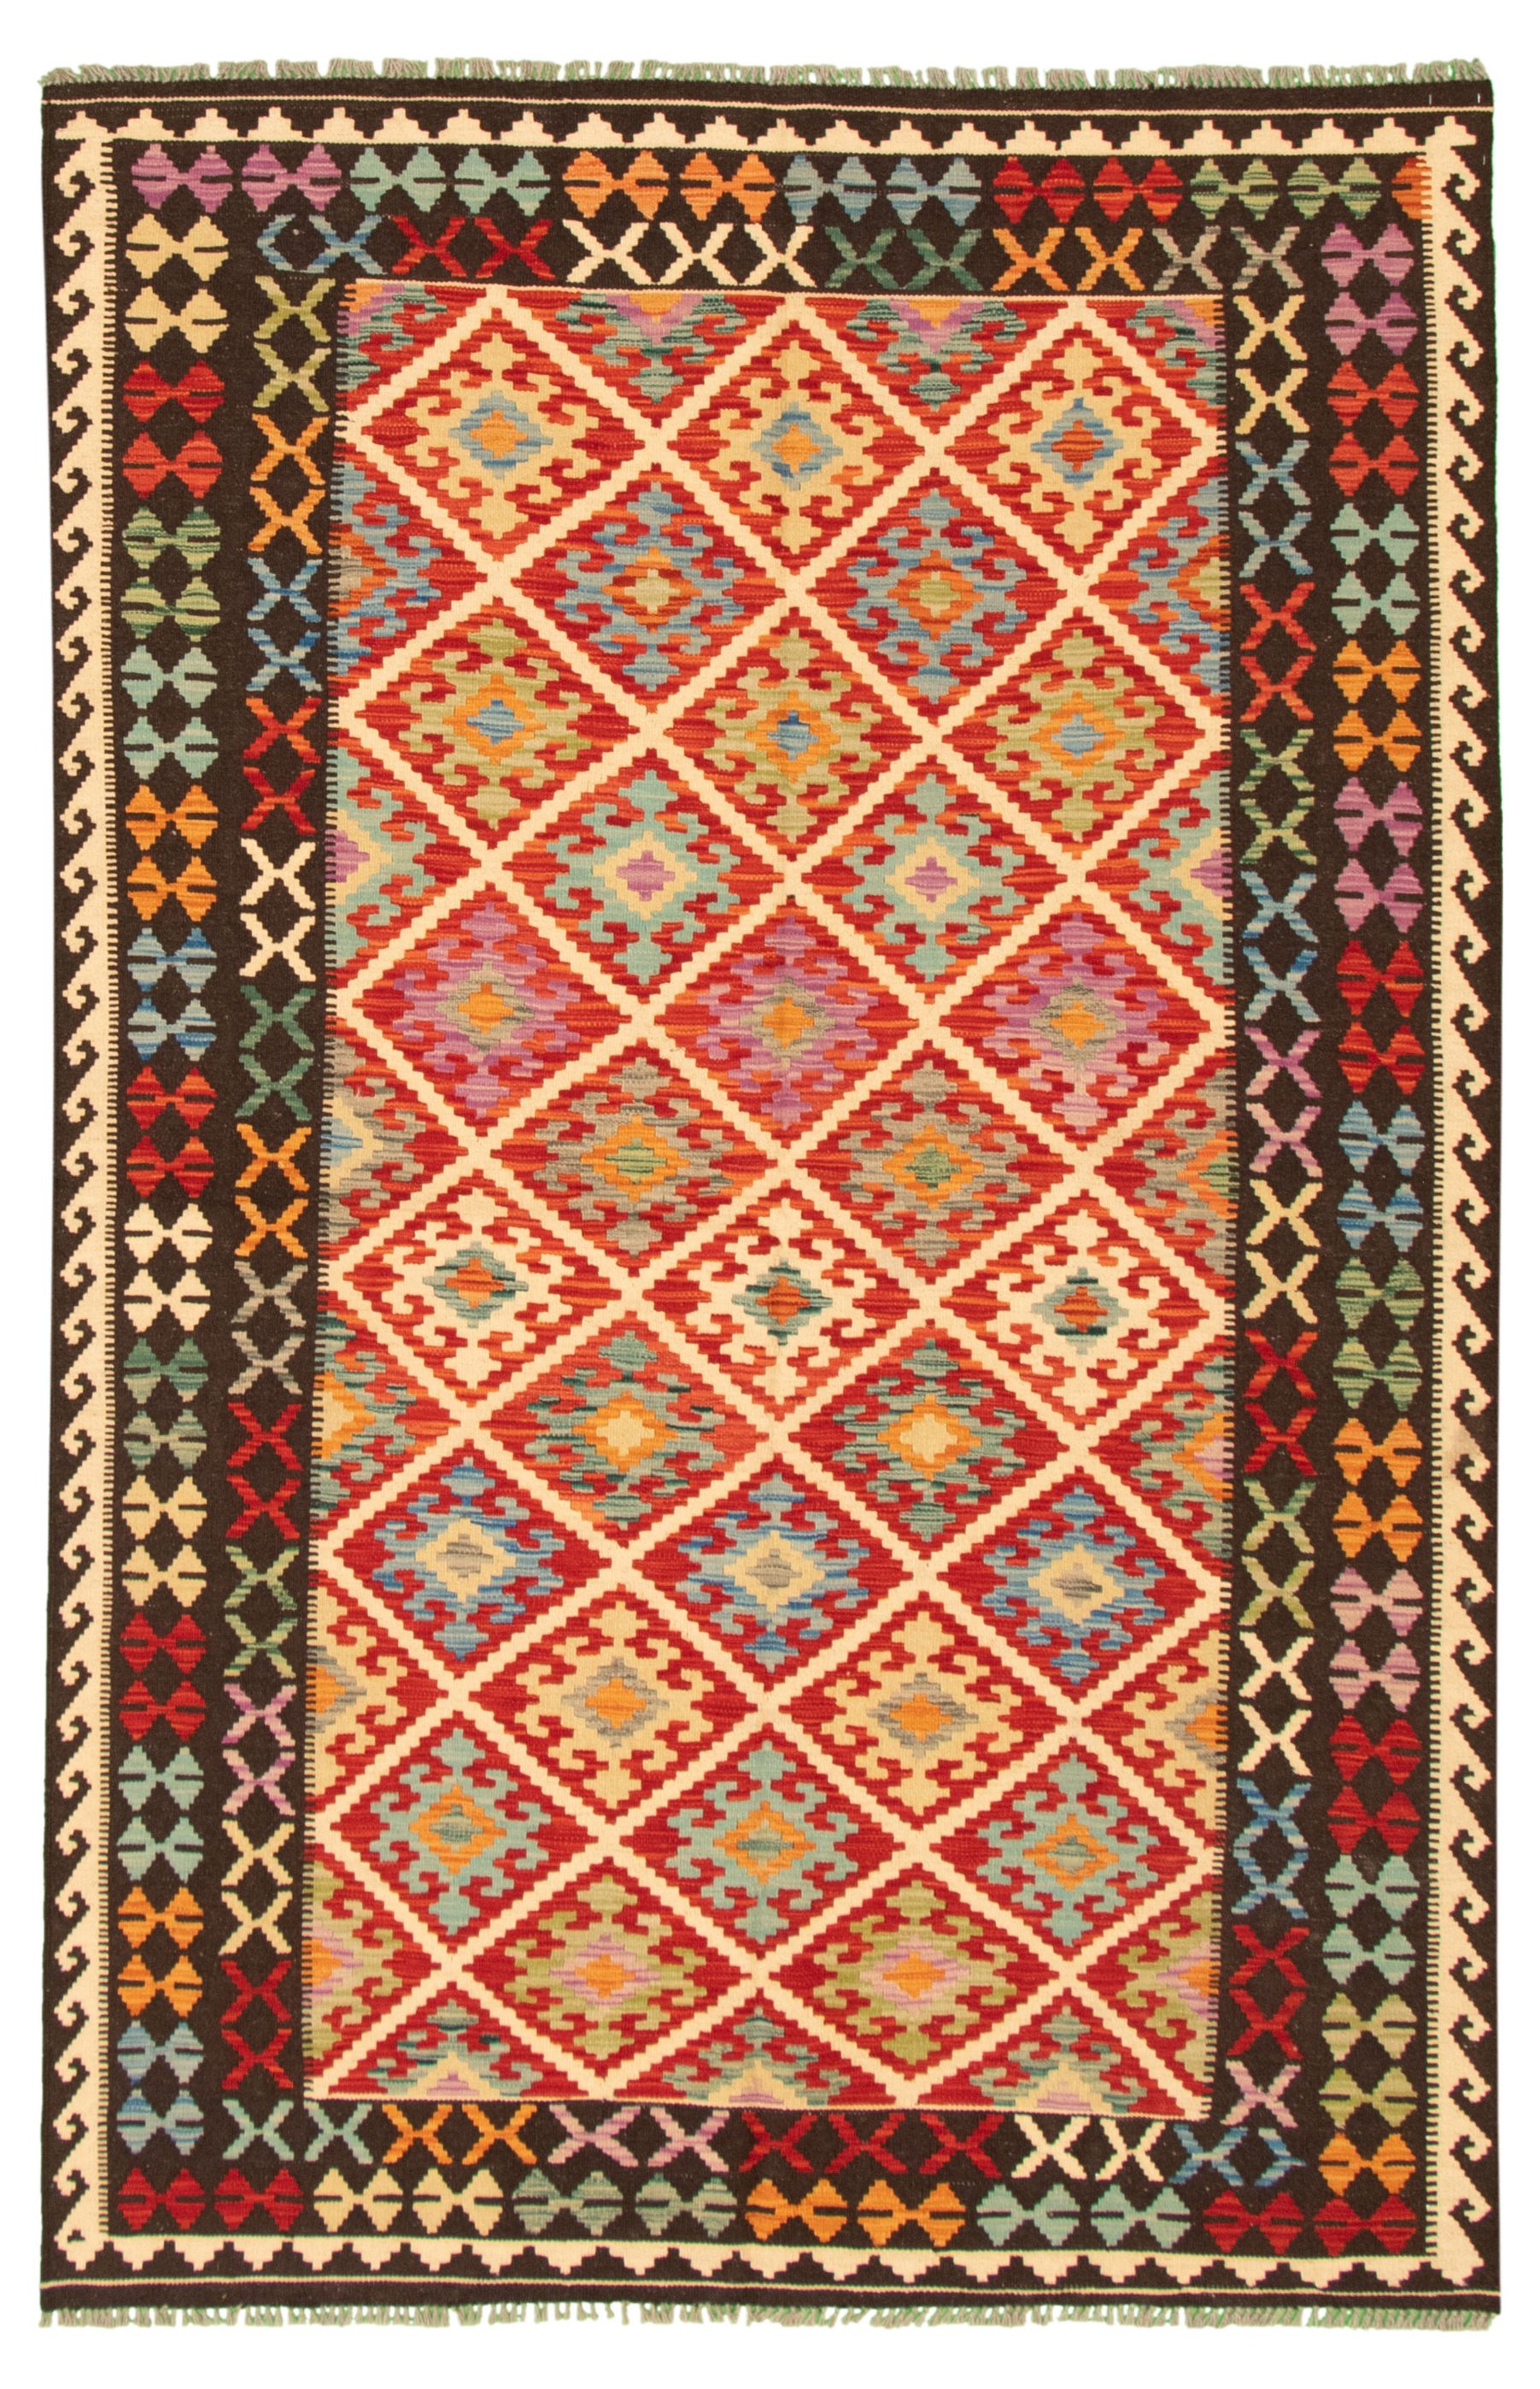 Hand woven Bold and Colorful  Ivory, Red Wool Kilim 5'5" x 8'3" Size: 5'5" x 8'3"  